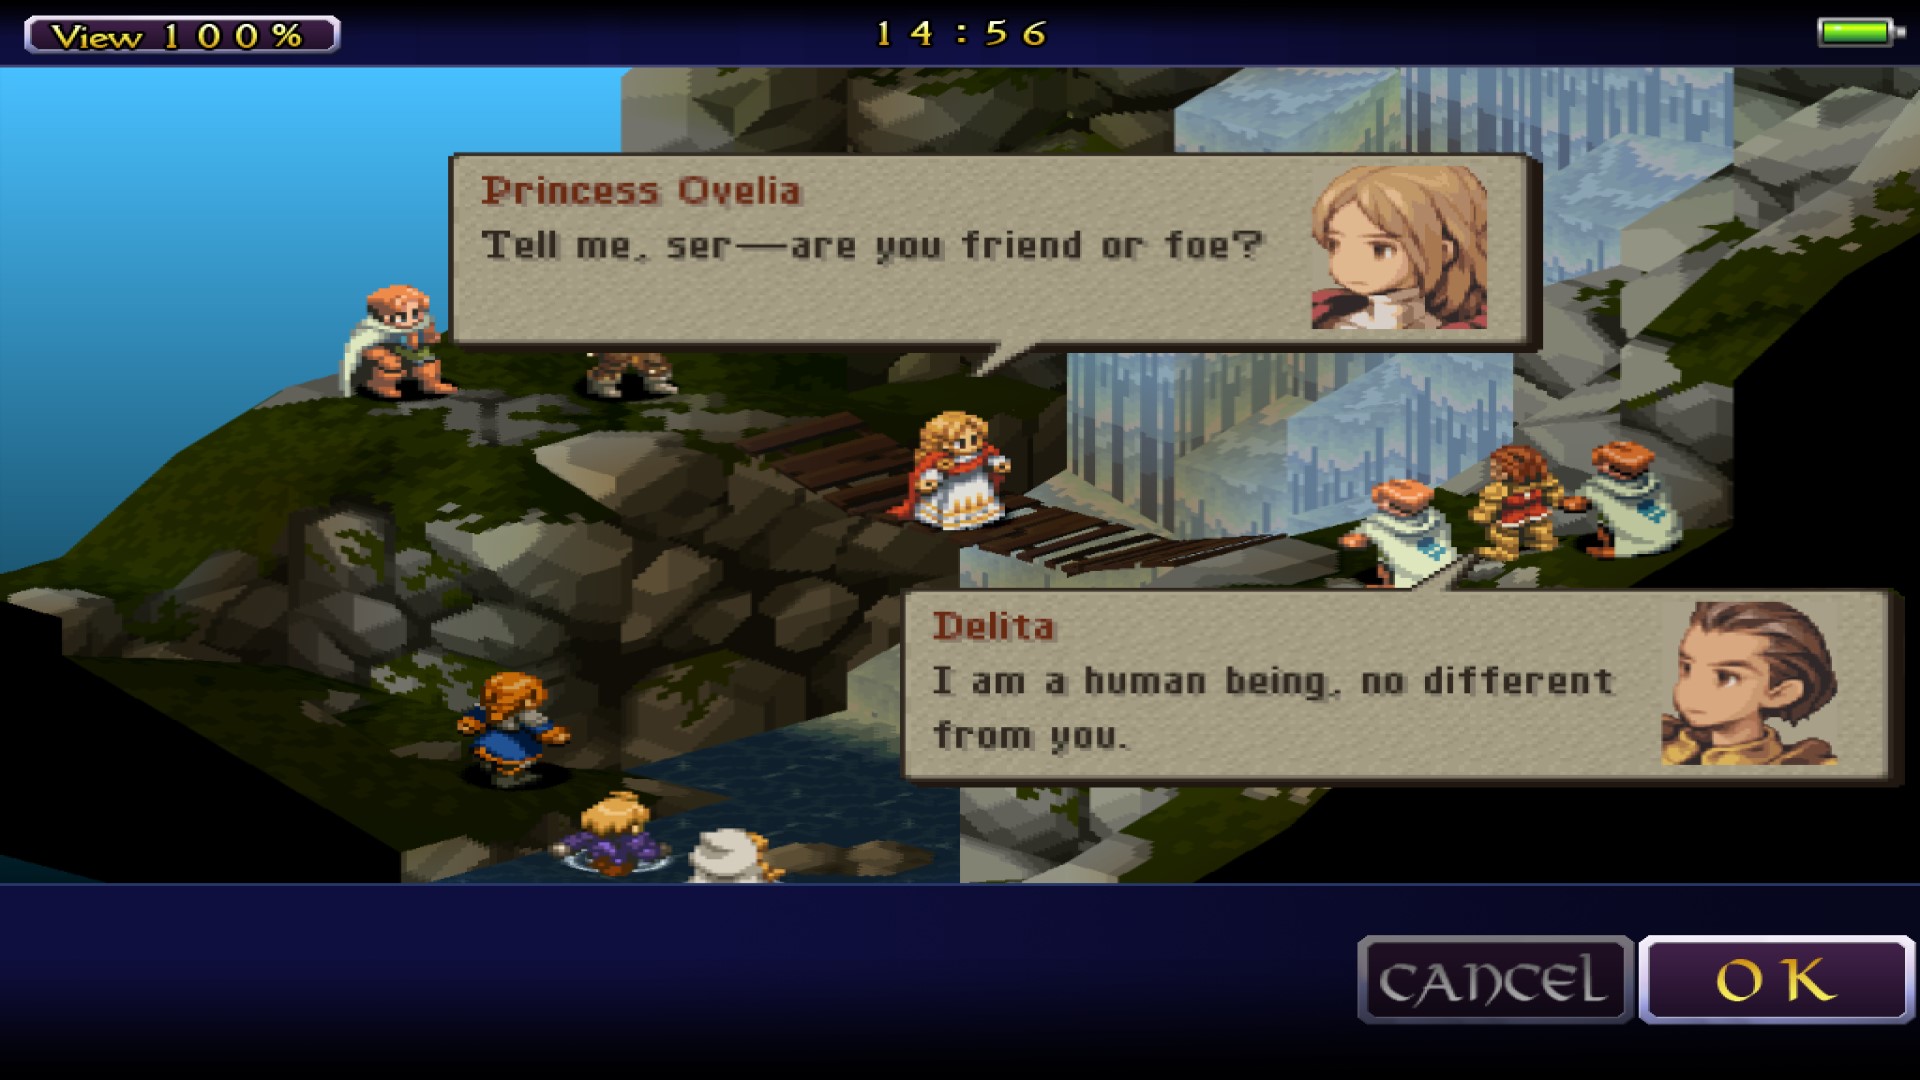 Best mobile strategy games: Final Fantasy Tactics: War of the Lions. Characters are standing around a waterfall bridge. The character Princess Ovelia is saying 